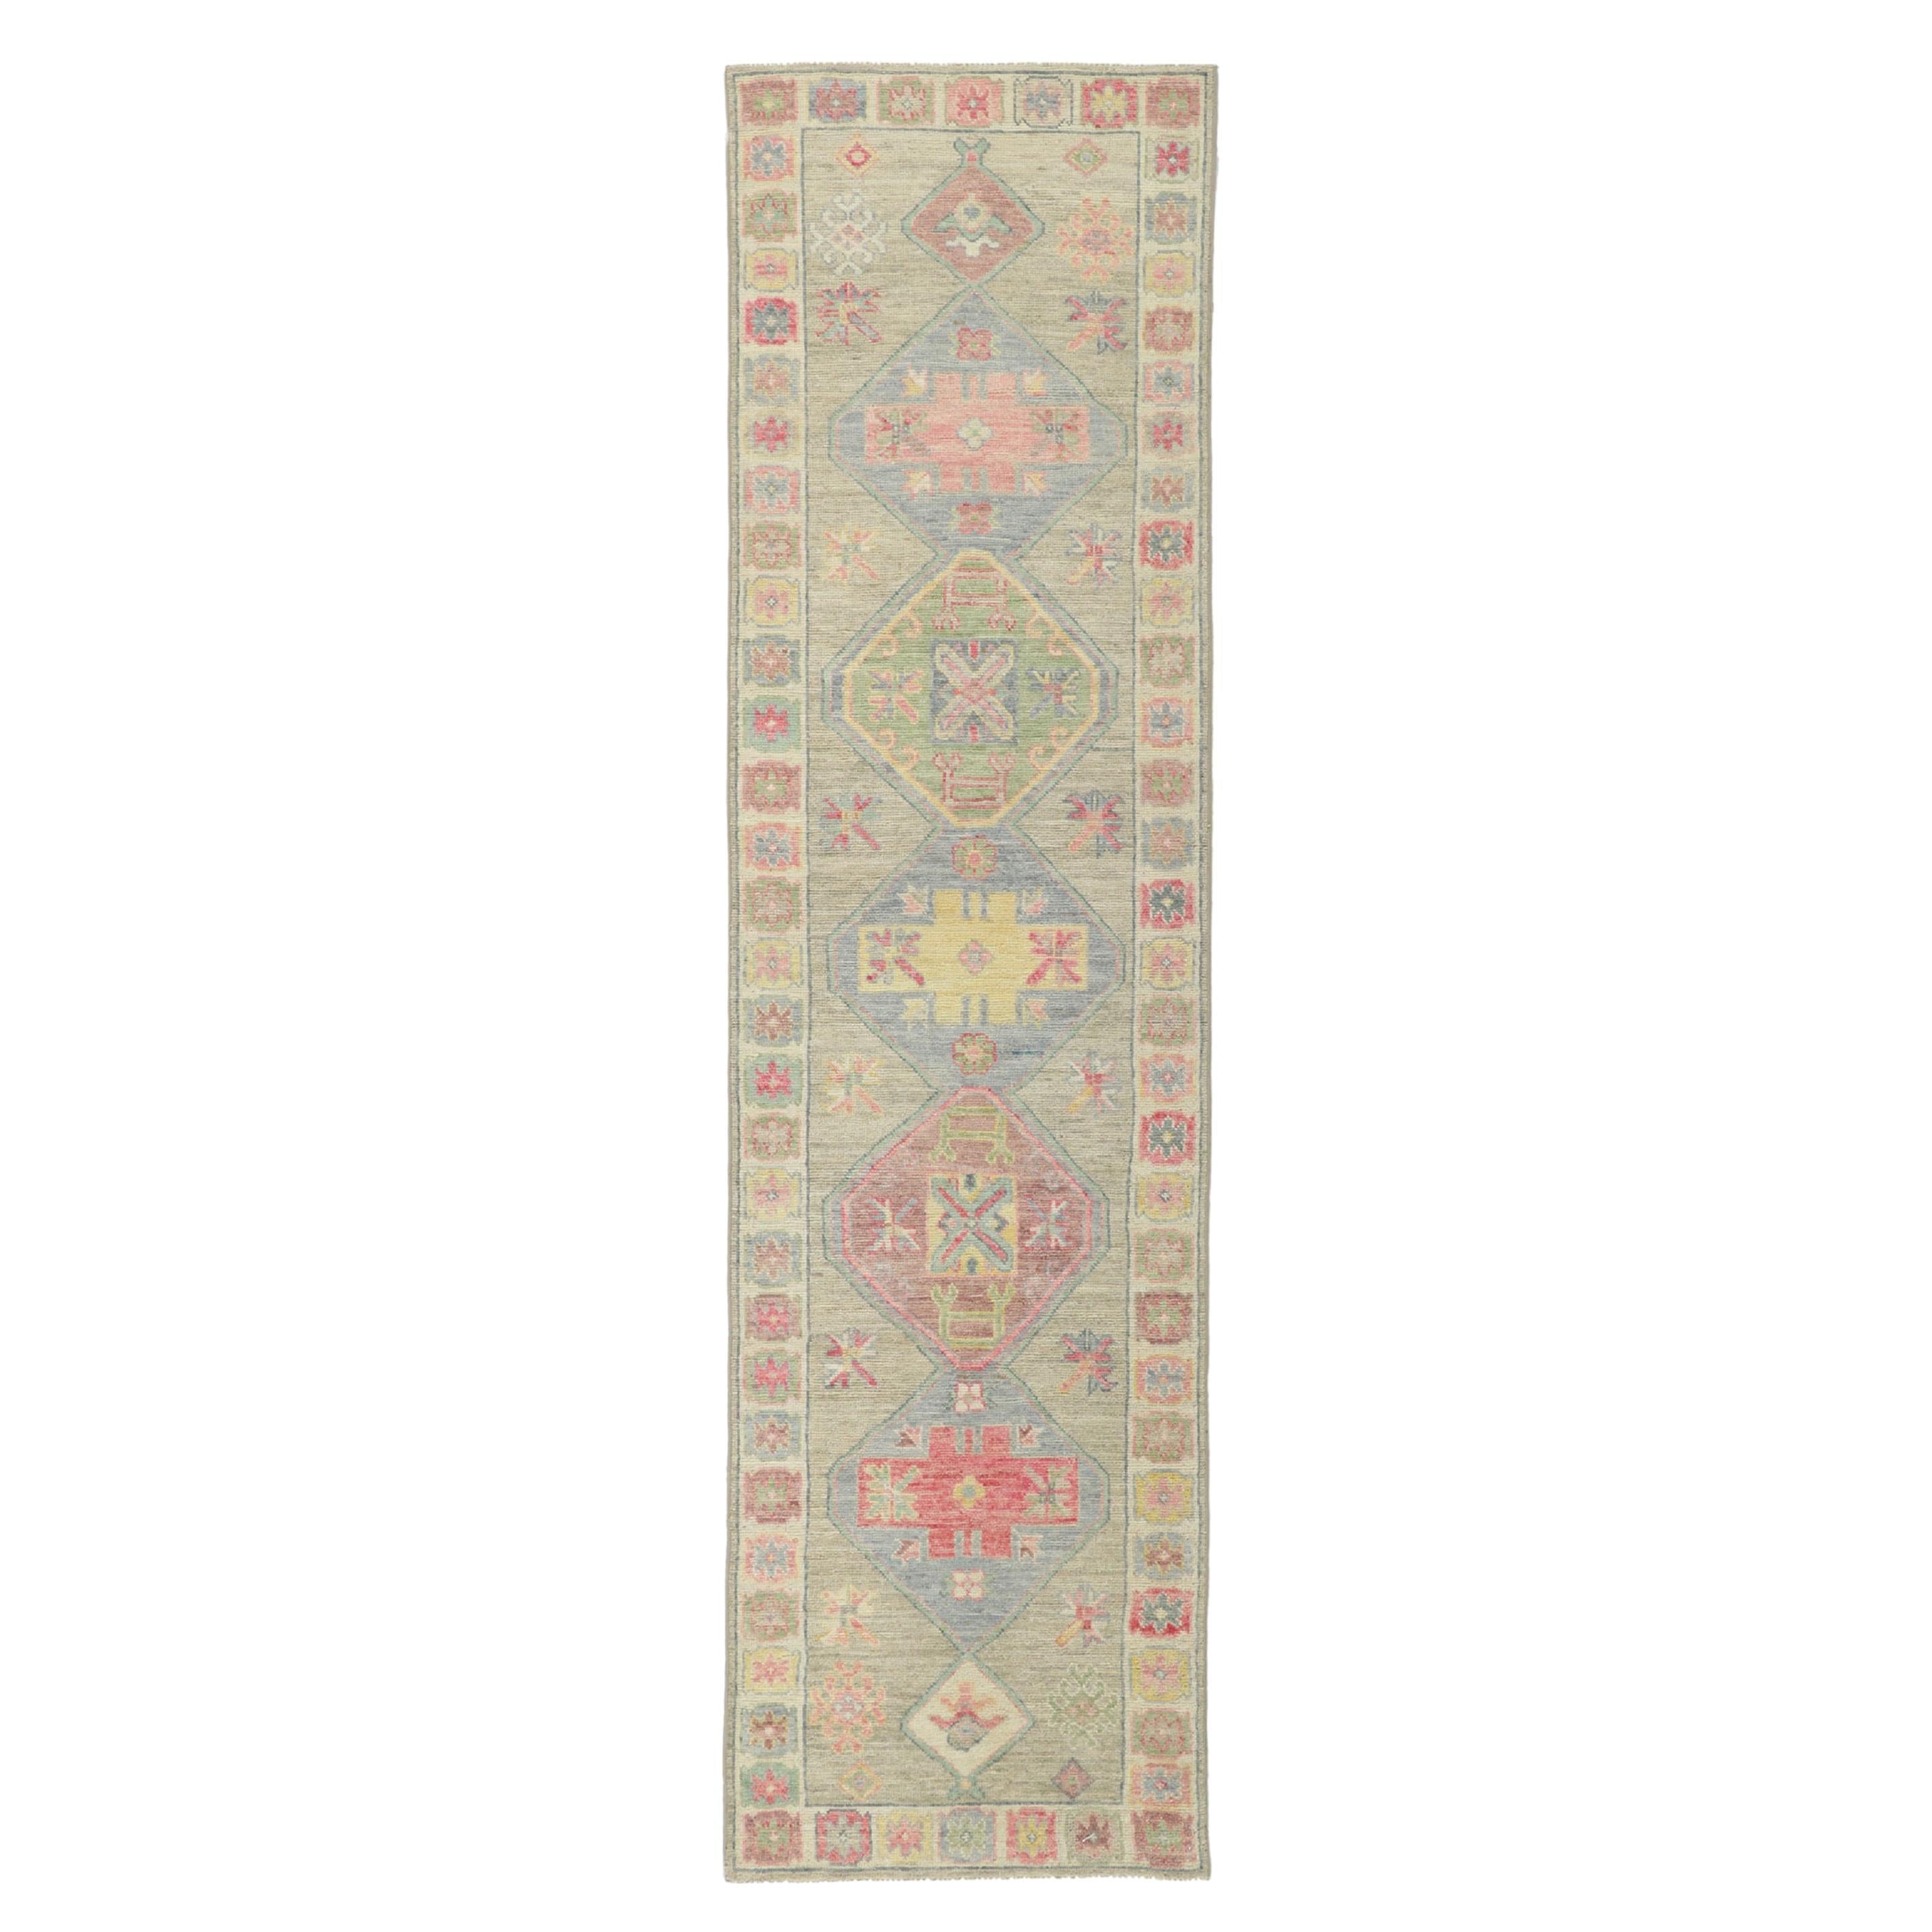 Modern Colorful Oushak Runner, Contemporary Elegance Meets Polished and Playful